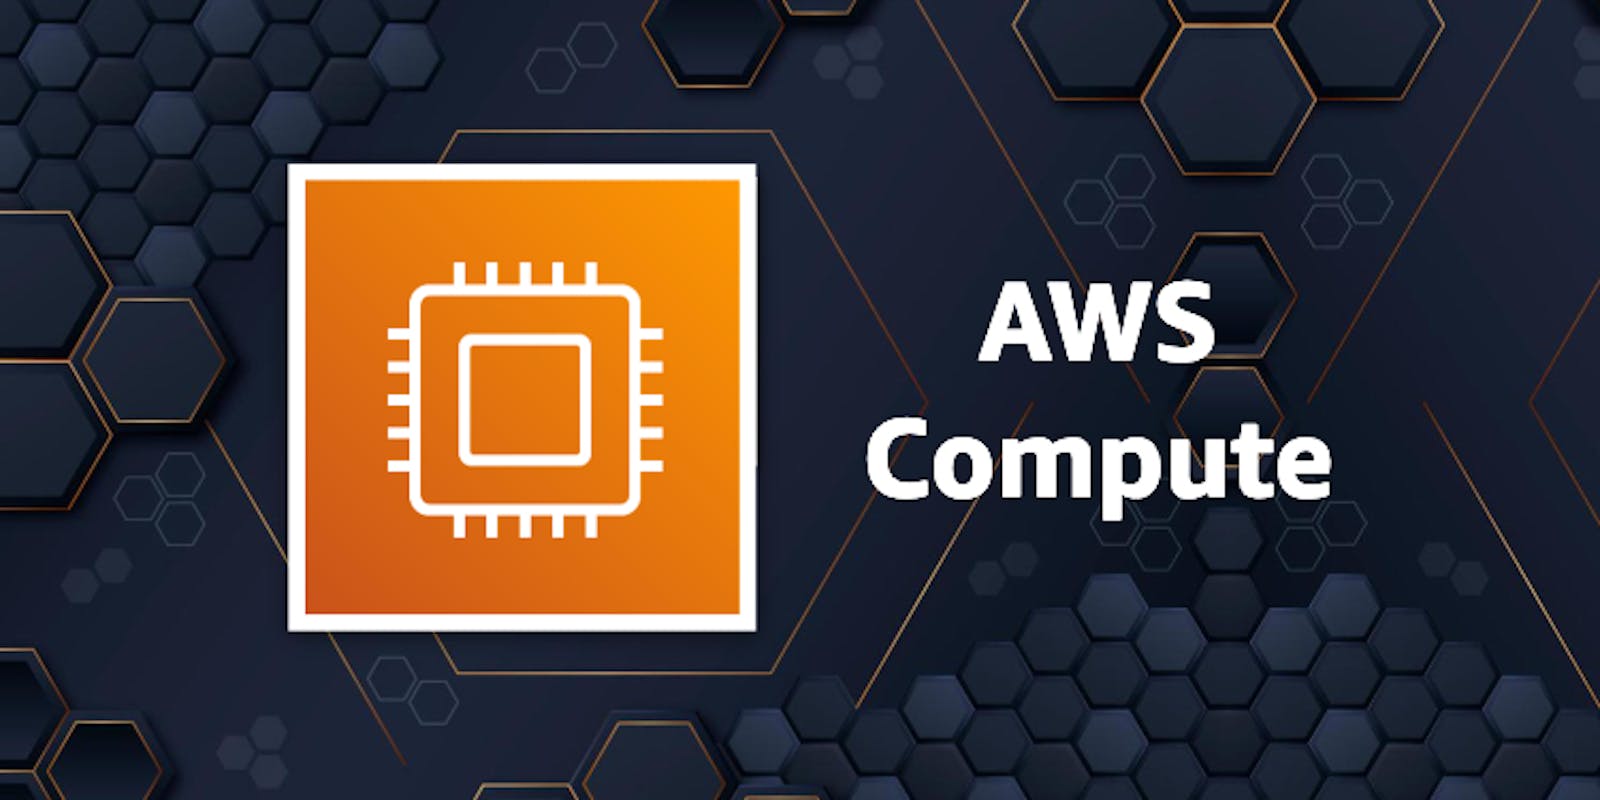 Day 5 of AWS essentials